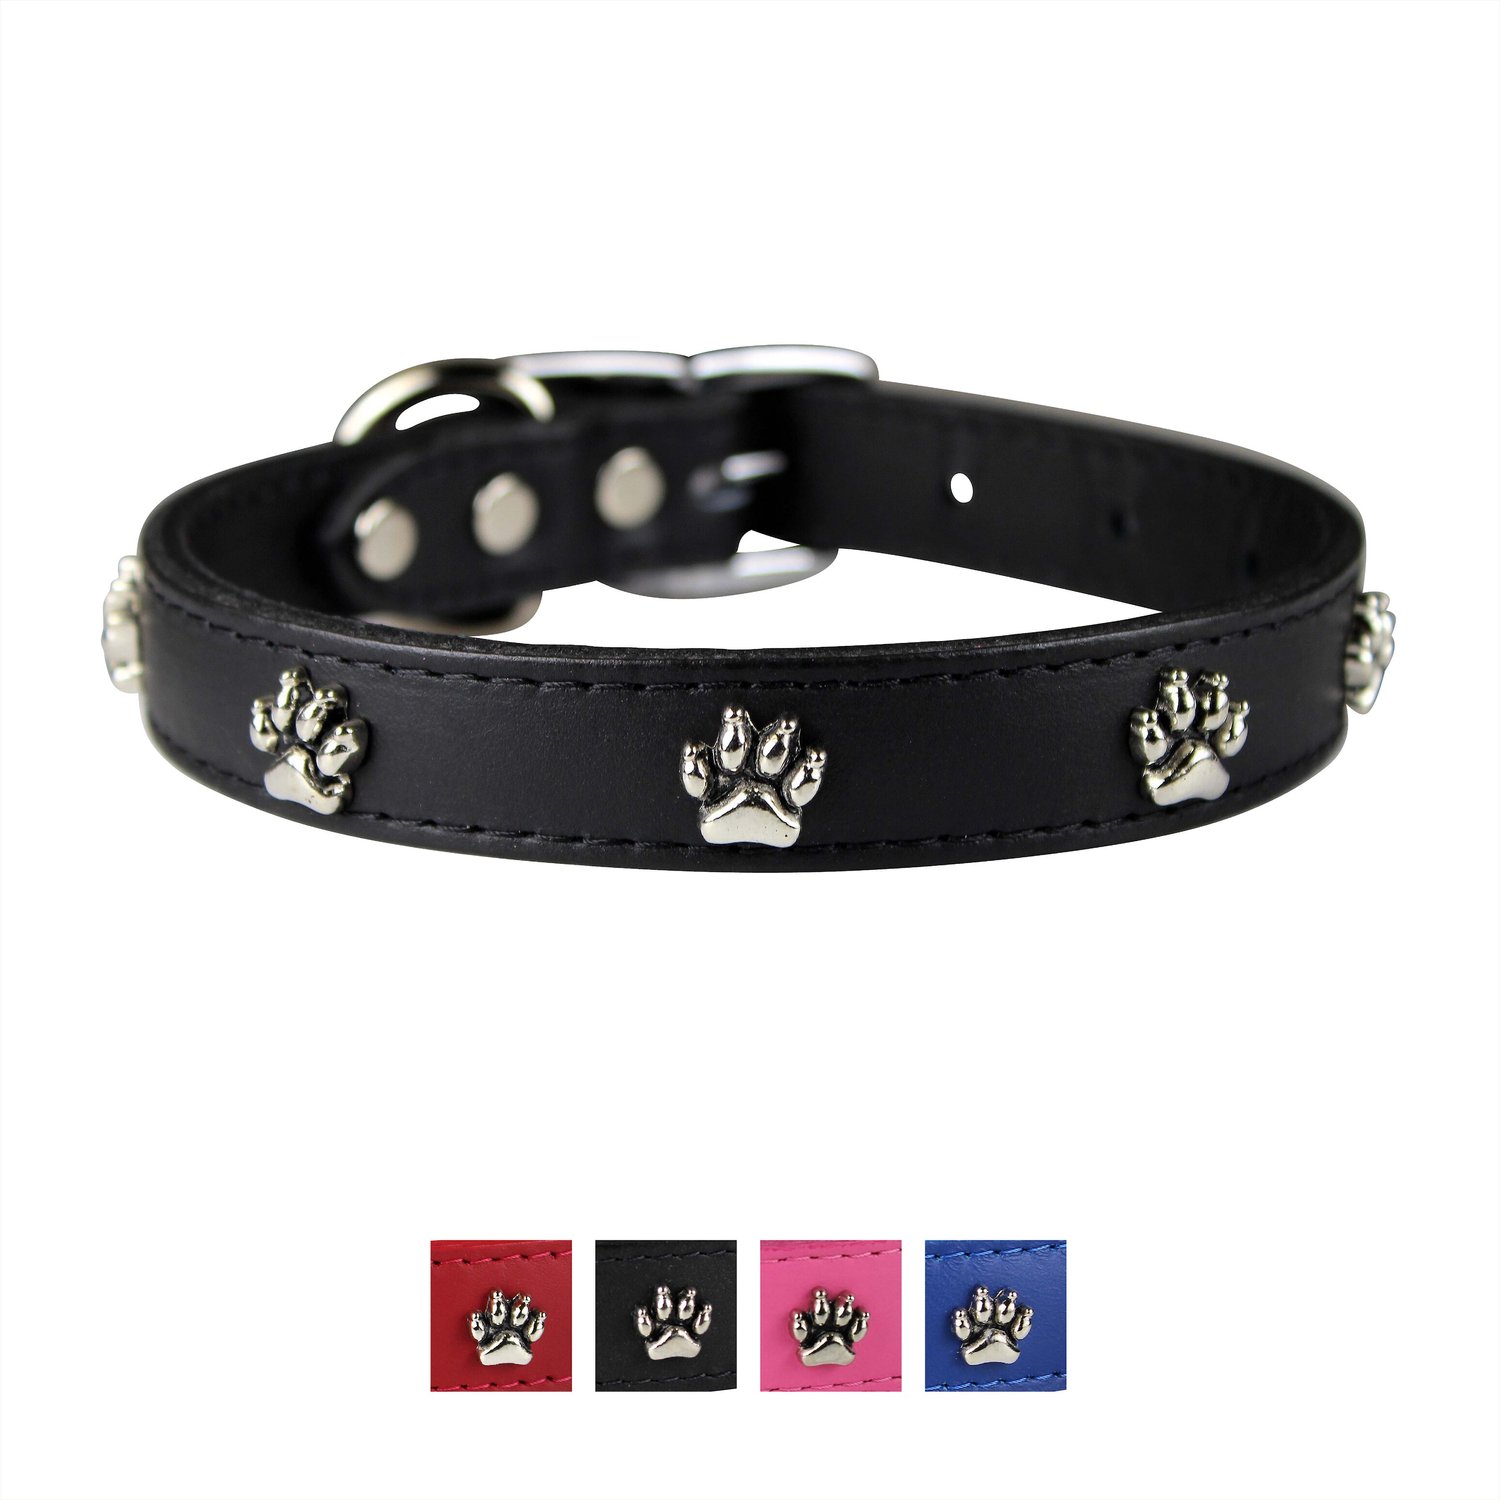 OMNIPET Signature Leather Paw Dog Collar, Black, 20-in - Chewy.com